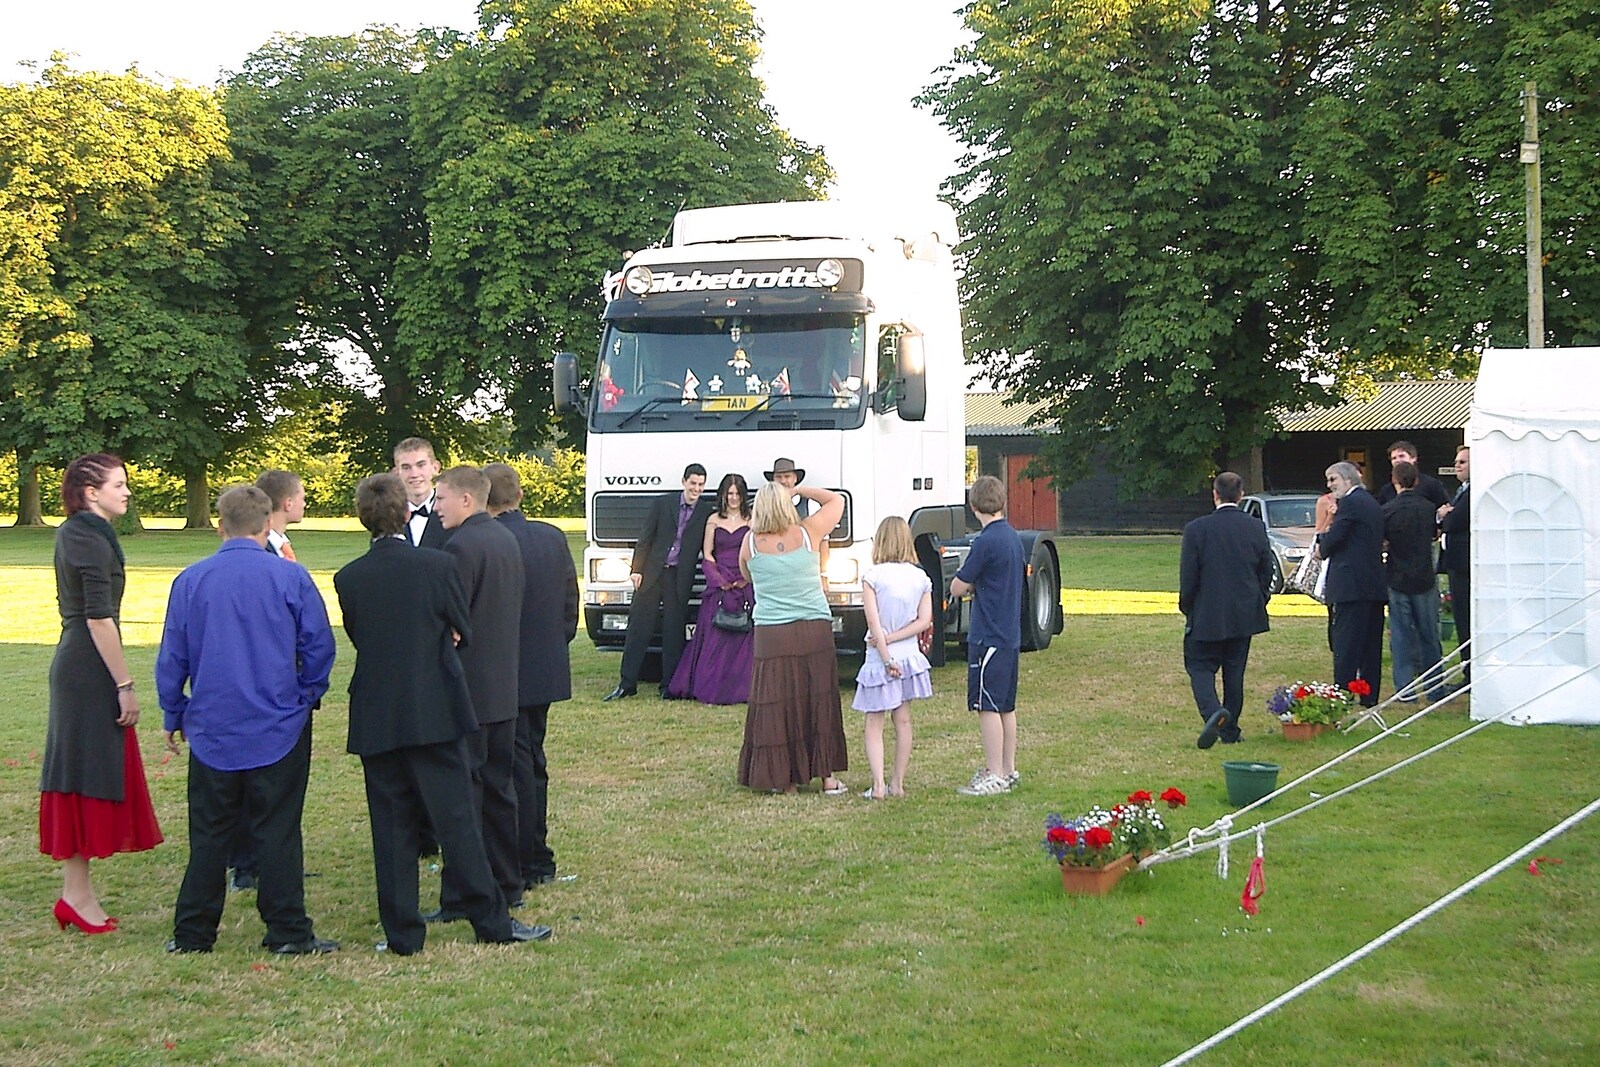 One party-goer arrives in a Volvo tractor unit from The BBs Play Athelington Hall, Horham, Suffolk - 29th June 2006